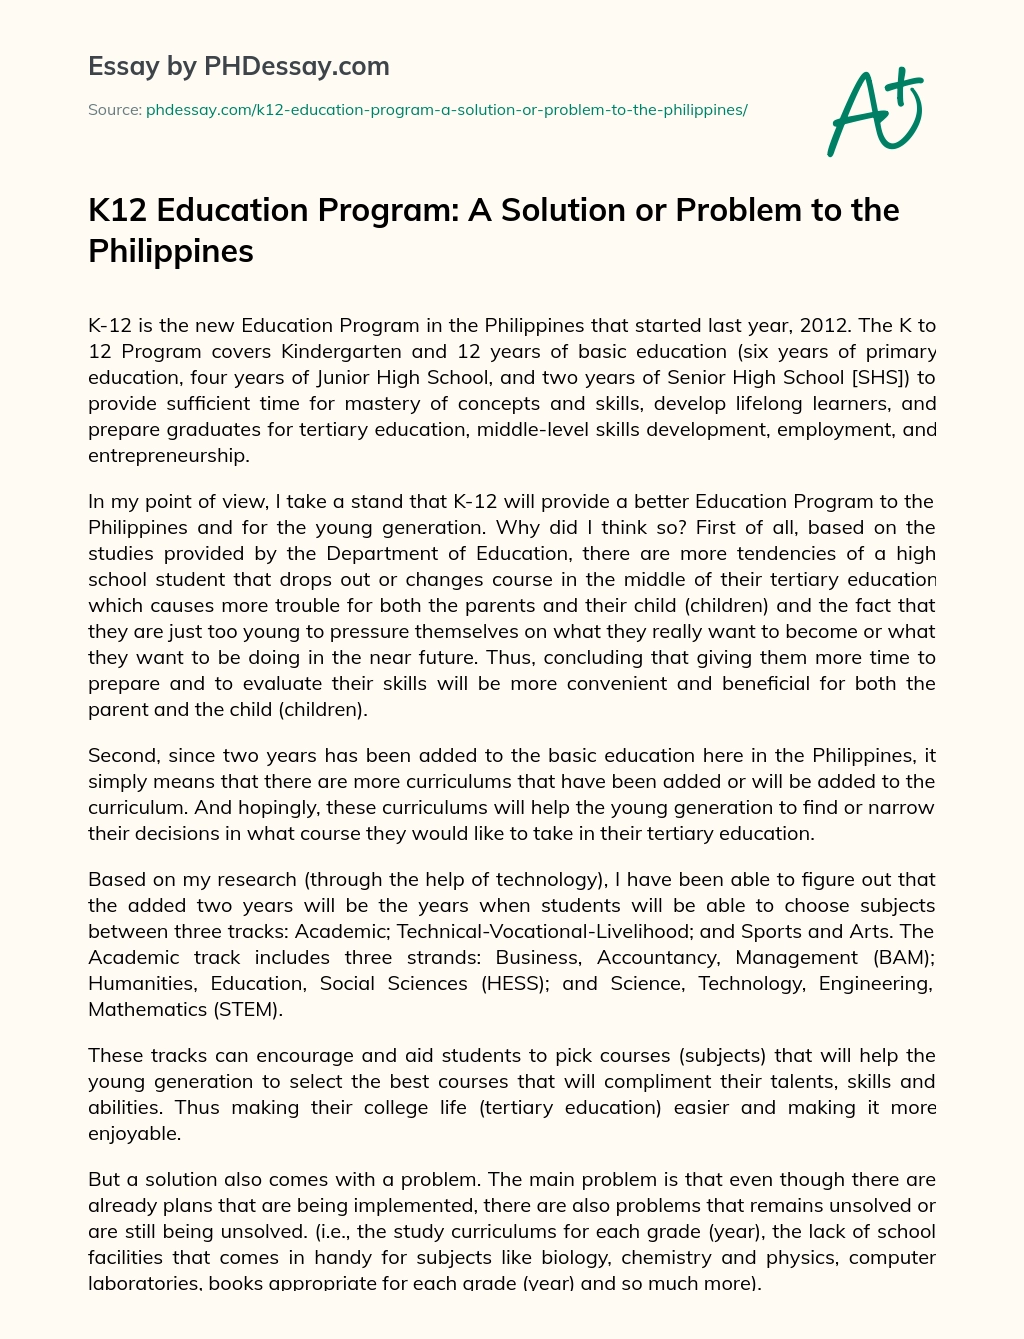 K12 Education Program: A Solution or Problem to the Philippines essay